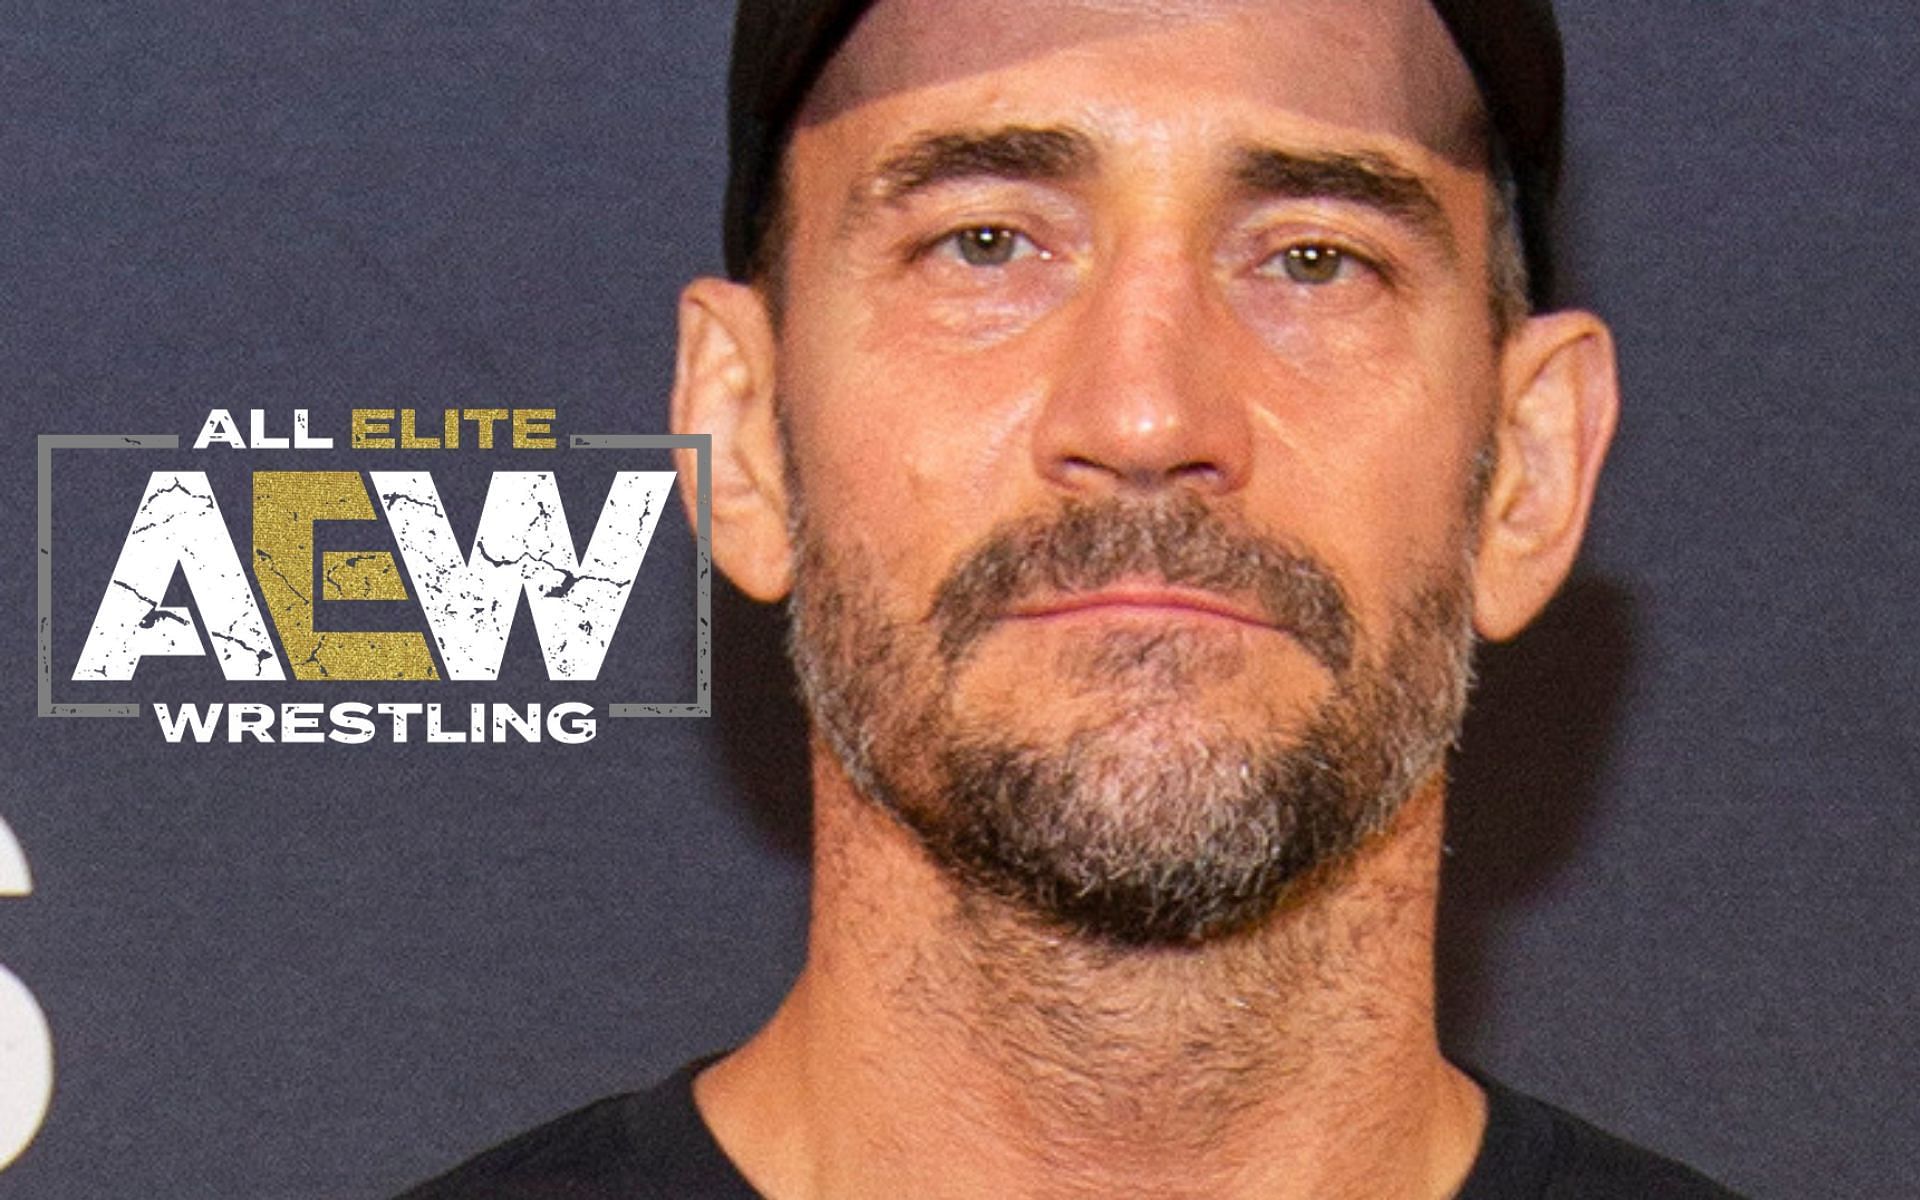 CM Punk had his last AEW match at All Out this year against Jon Moxley